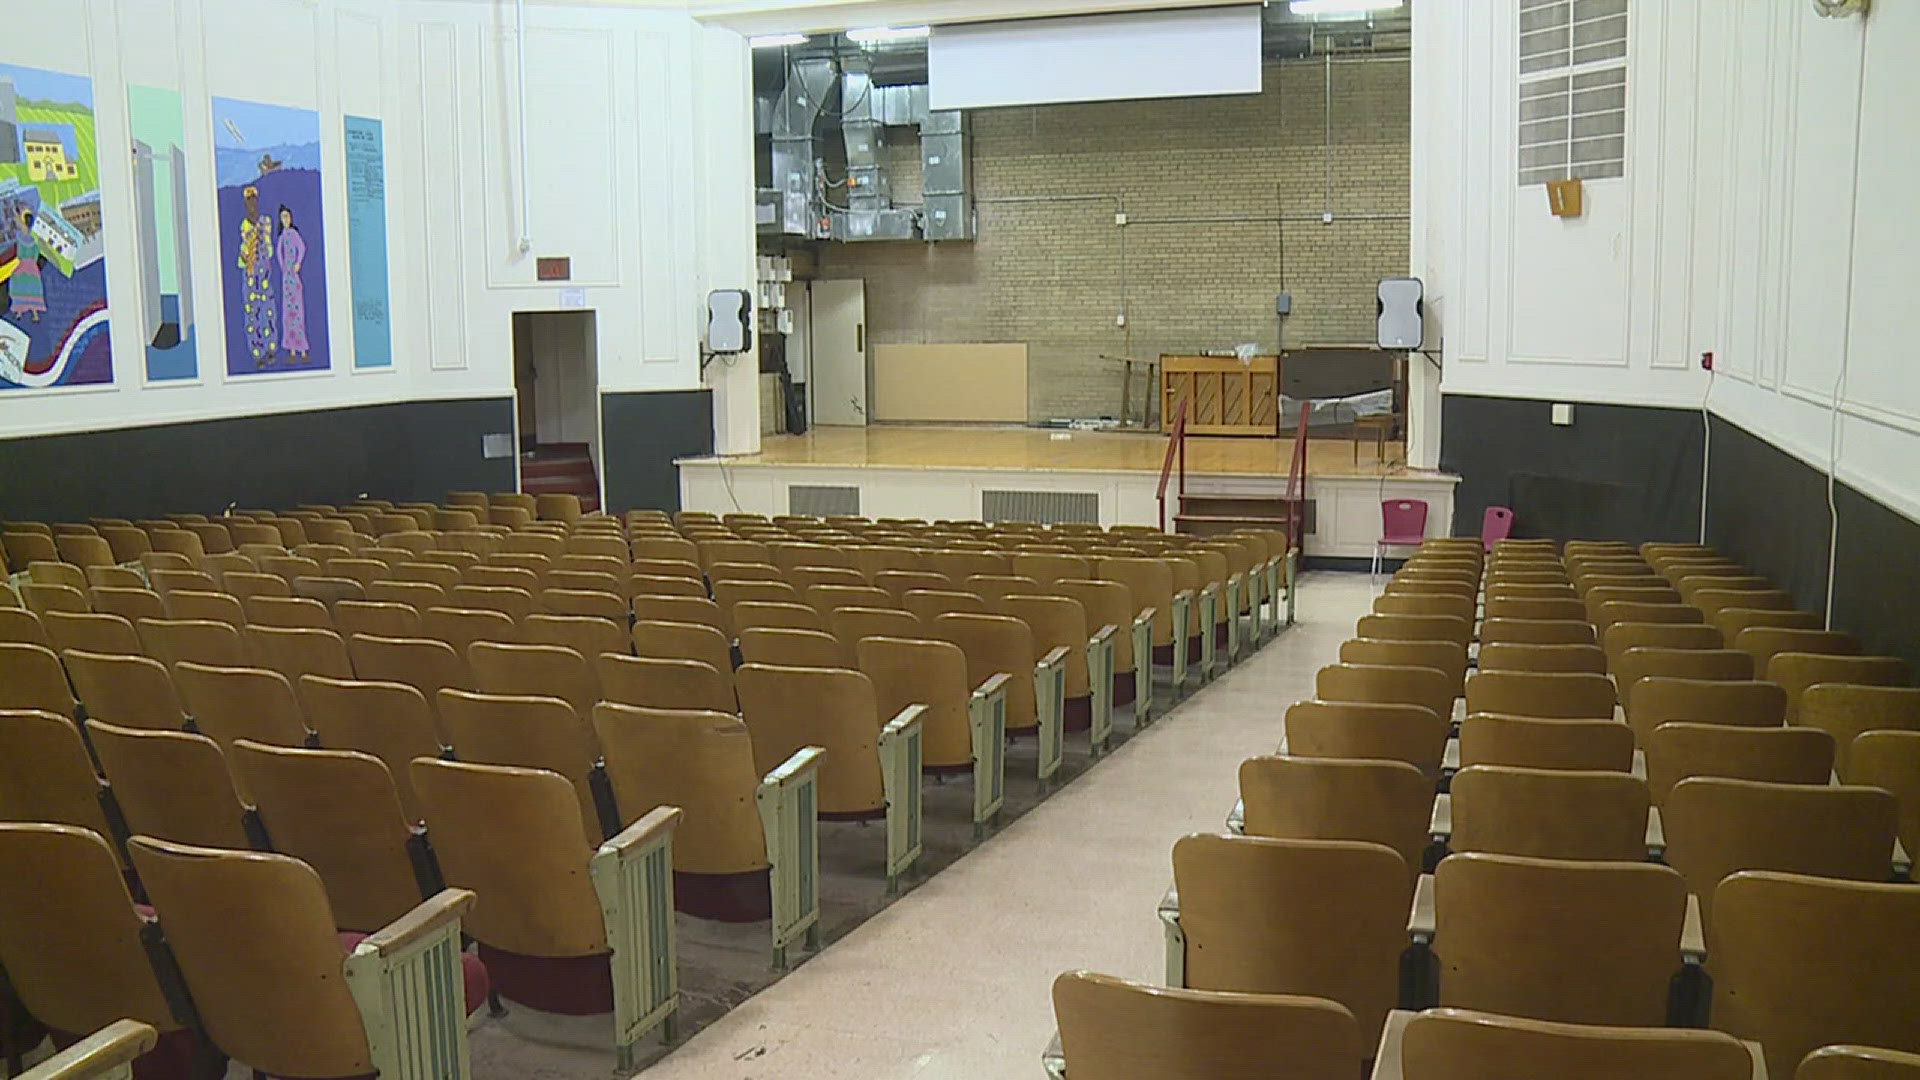 WQAD will air the first presidential debate tonight, the TMBC Lincoln Resource Center plans to restore auditorium, and Muscatine is demolishing a vacant building.